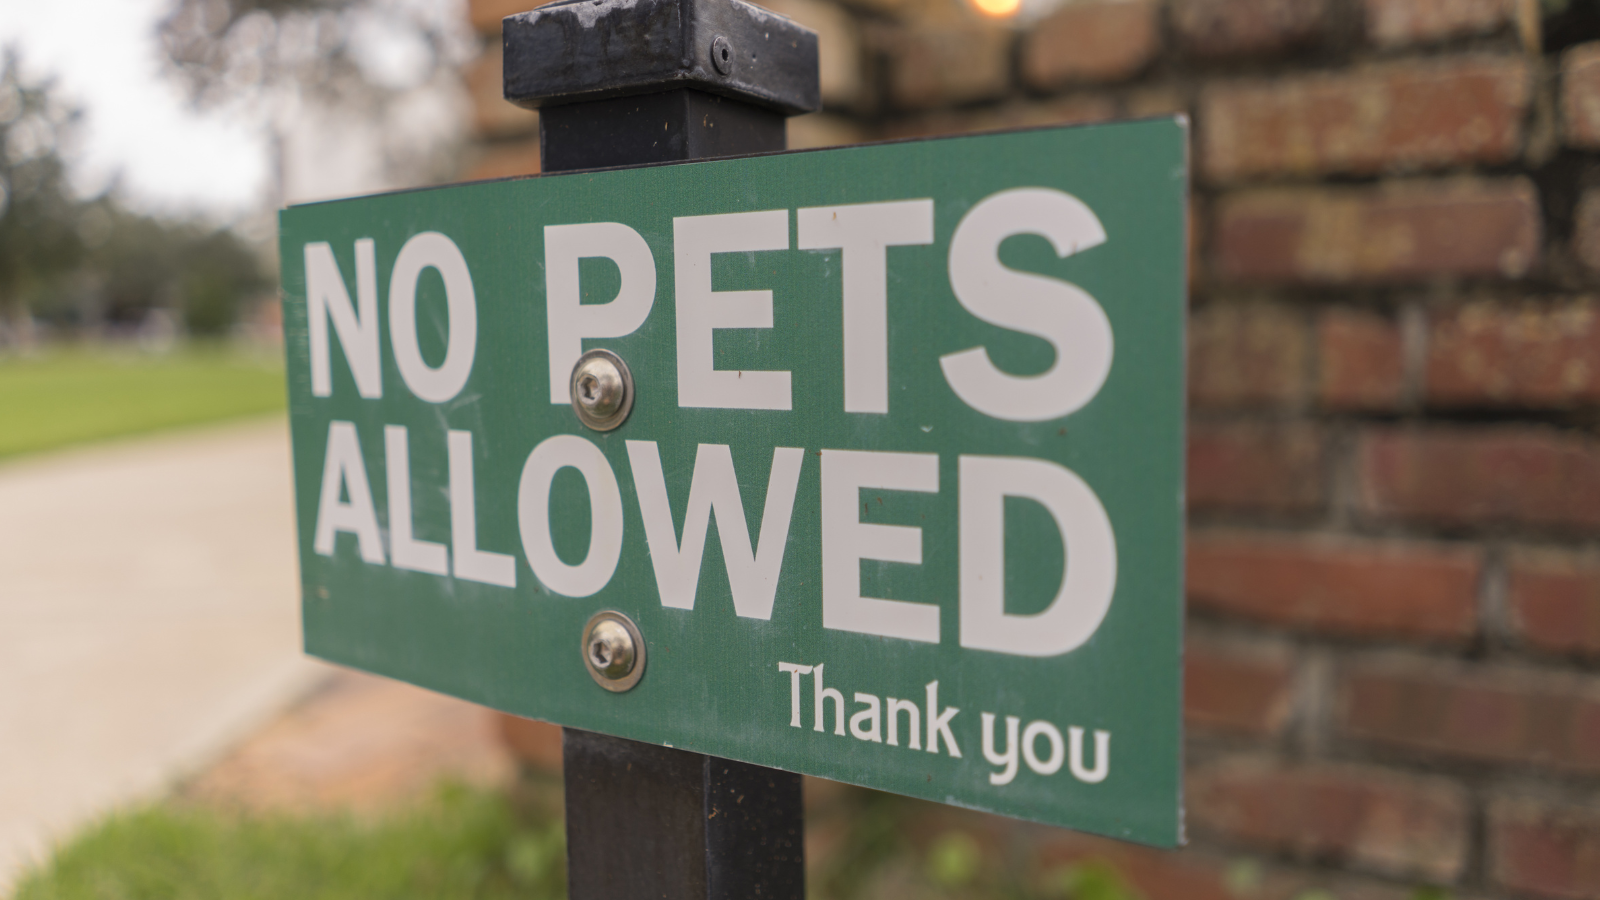 Pets allowed. No Pets allowed. Allowed картинки фото. Dogs are allowed.